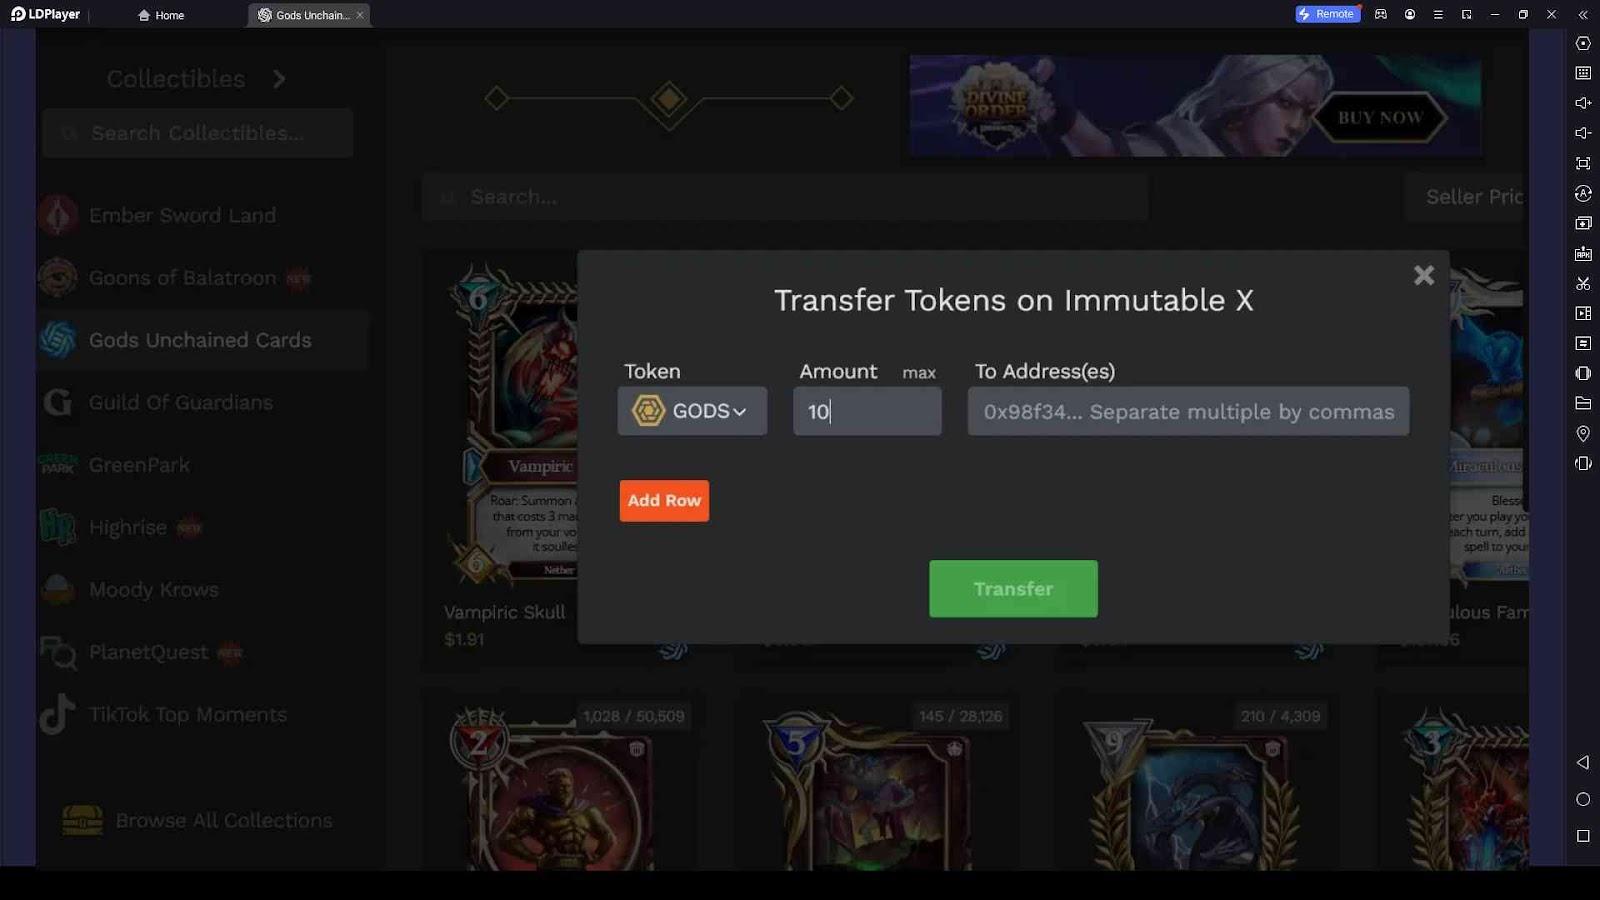 How to Withdraw Tokens in Gods Unchained